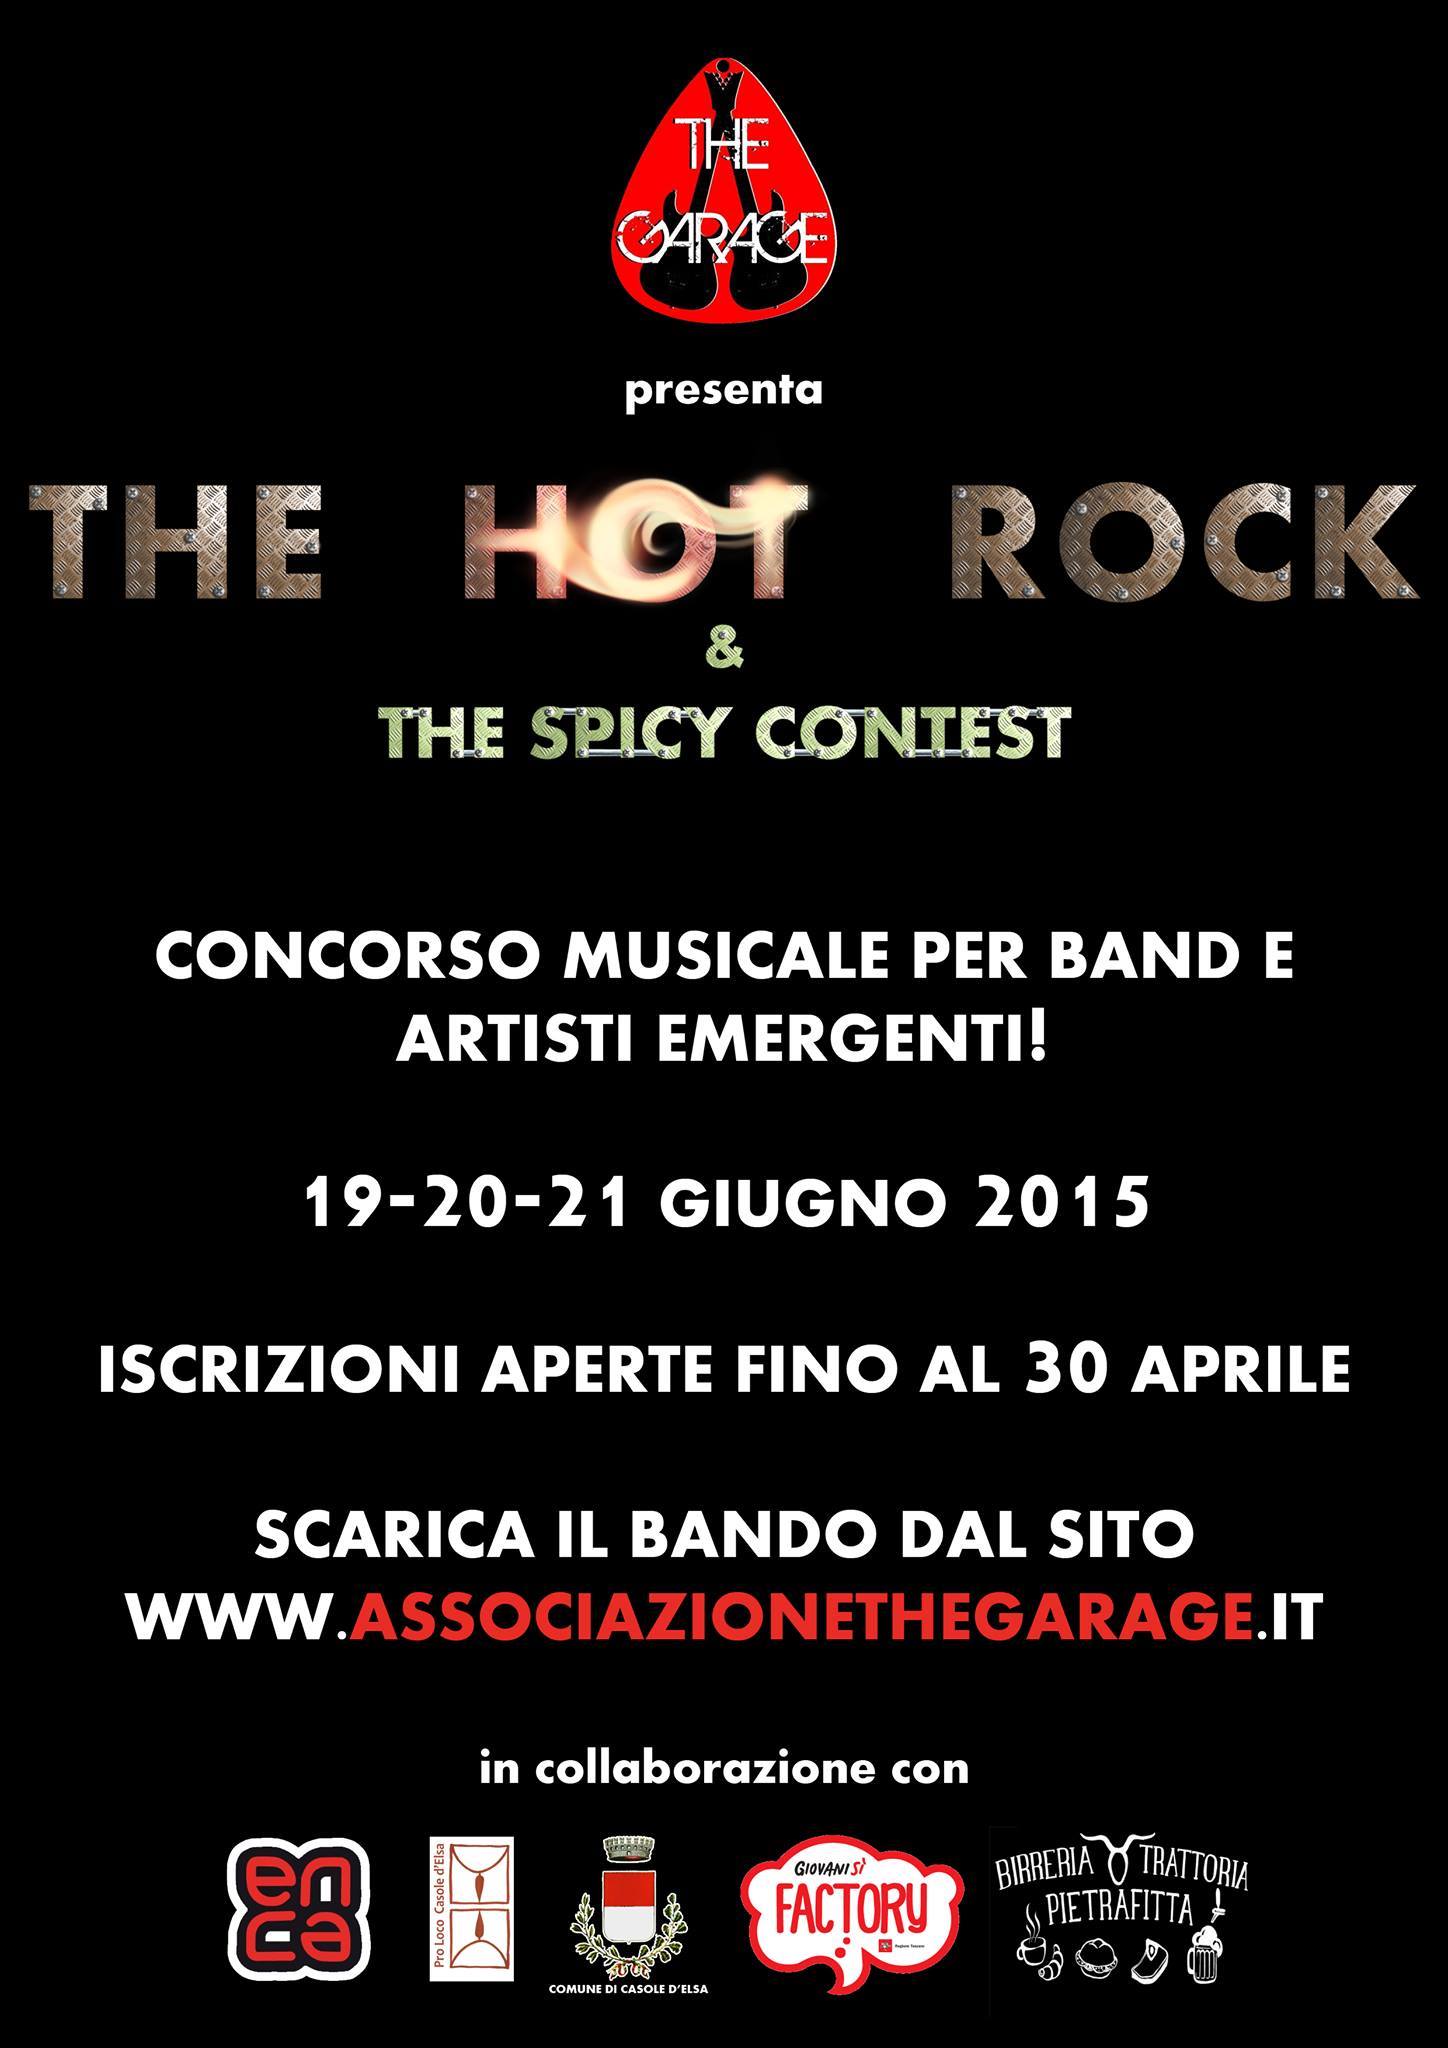 The Hot Rock & Spicy Contest